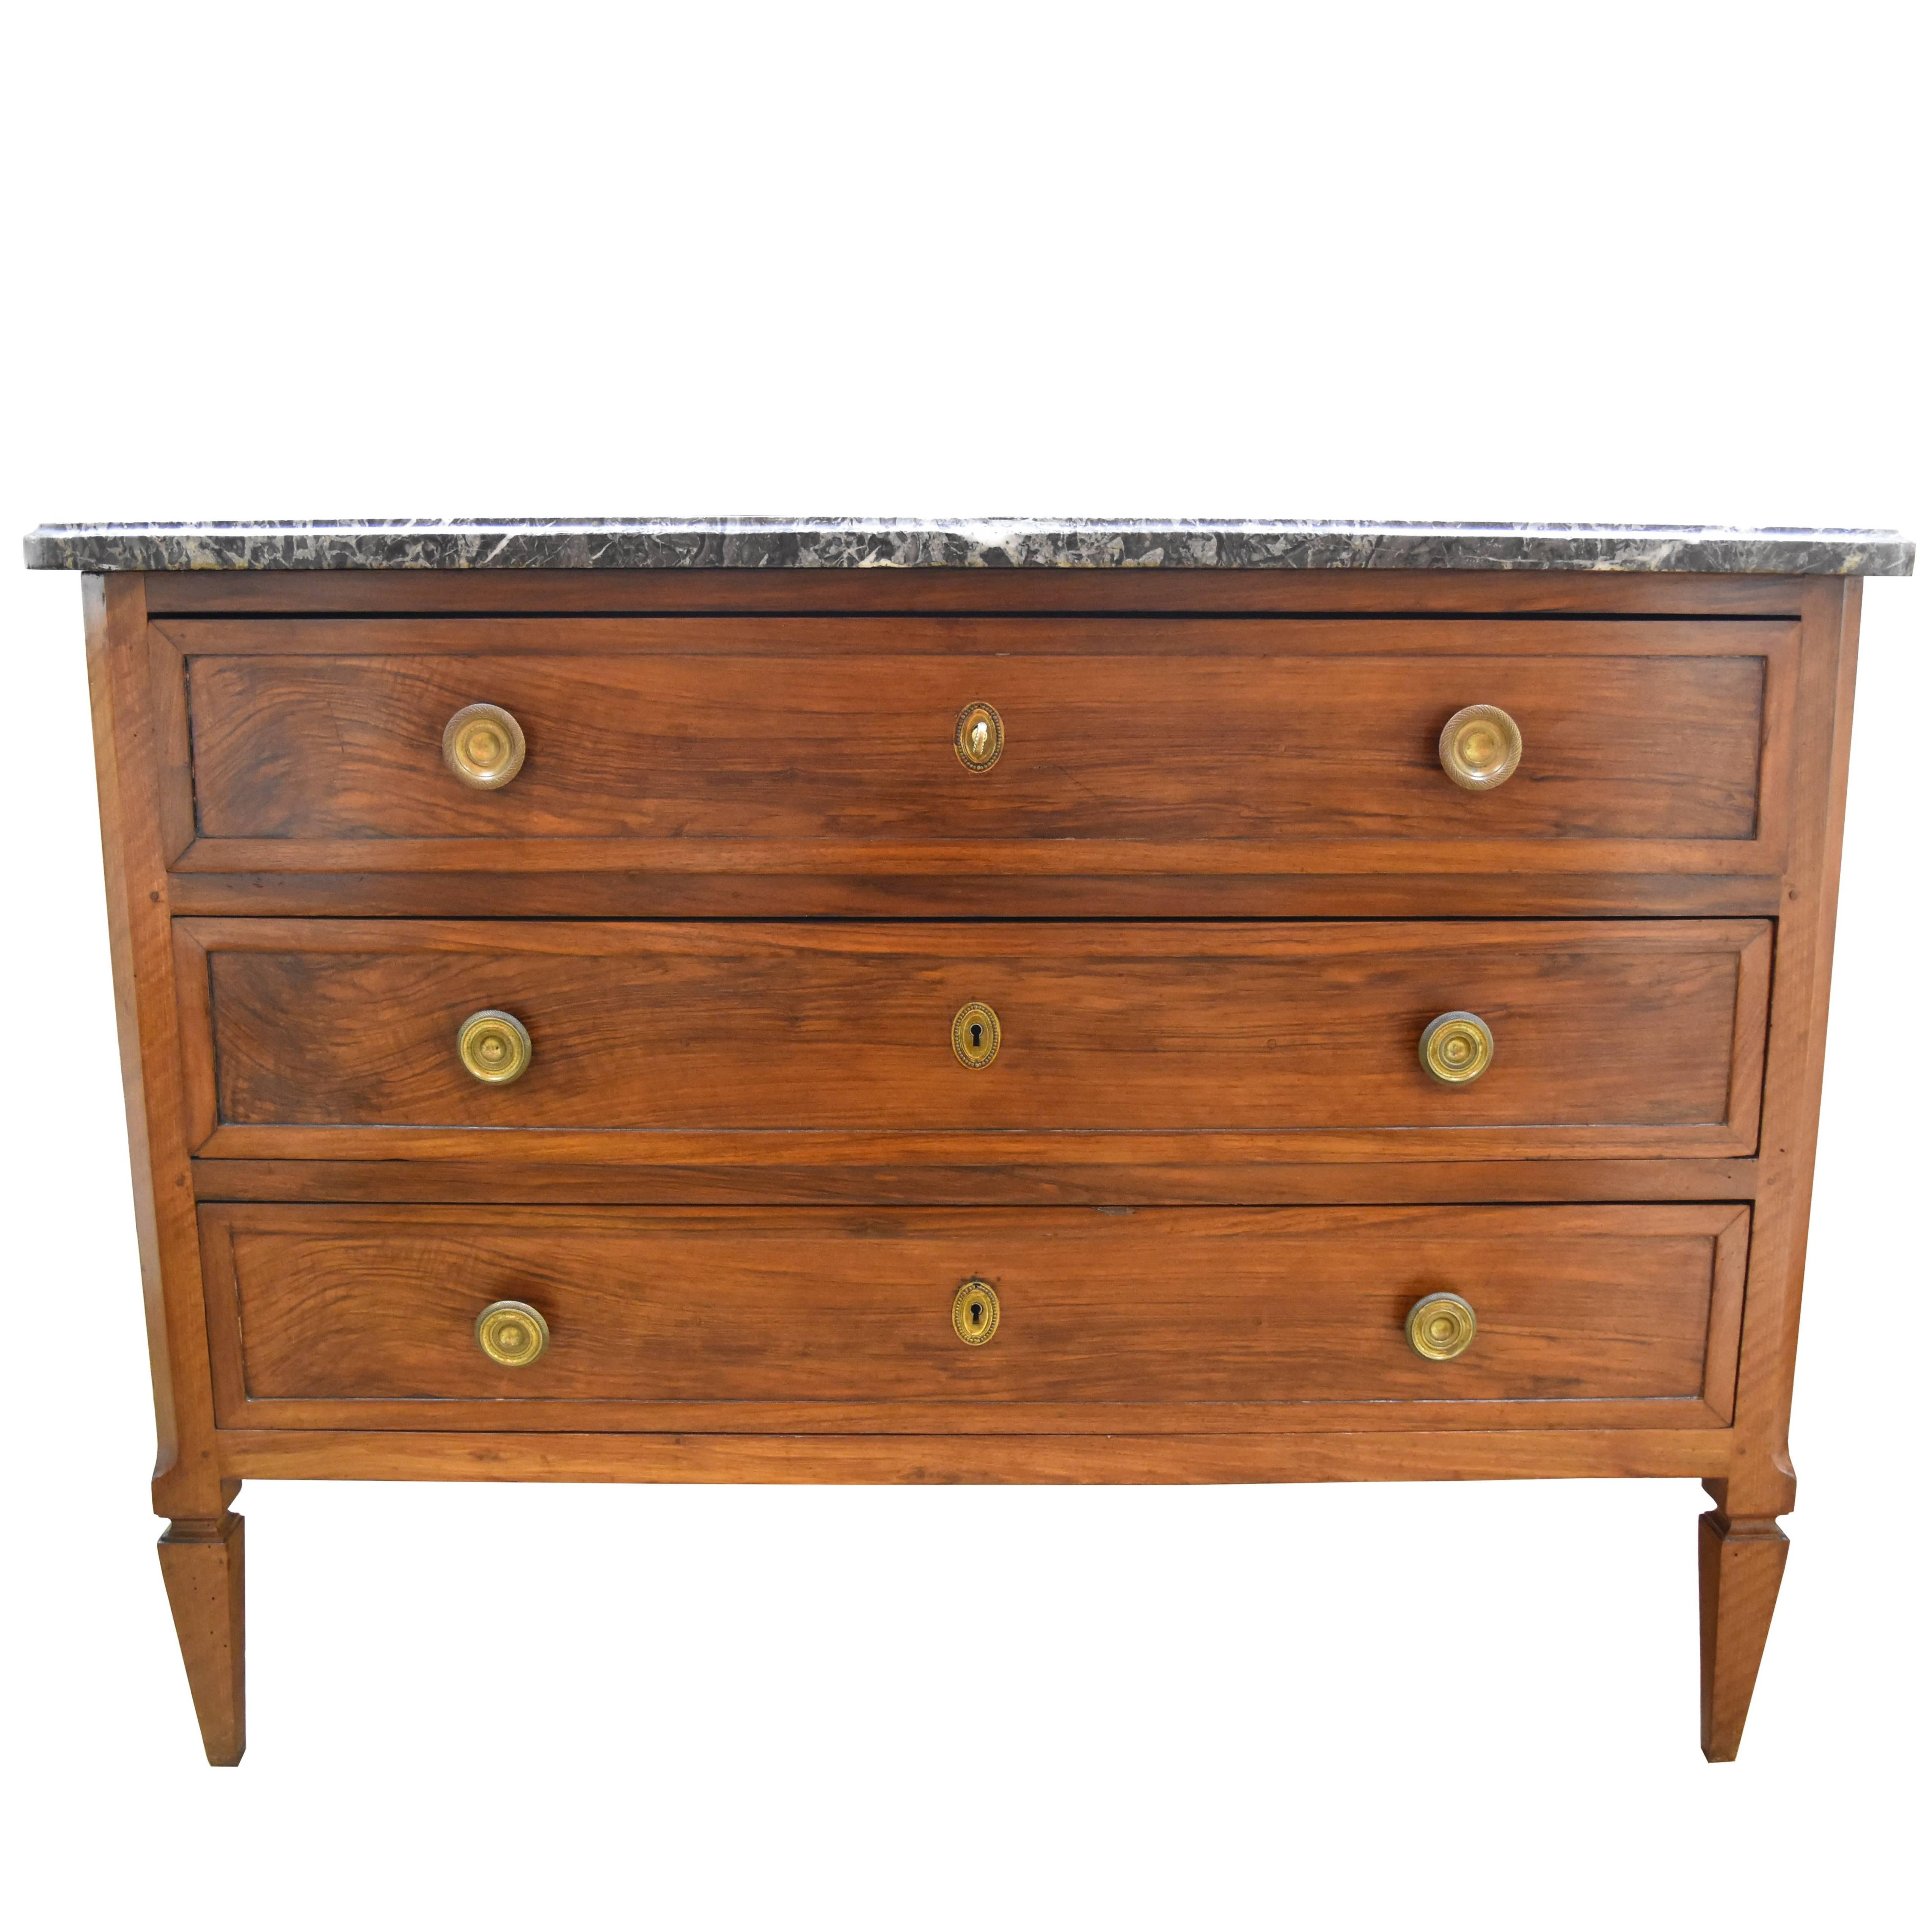 19th Century French Walnut Three-Drawer Commode with Marble Top